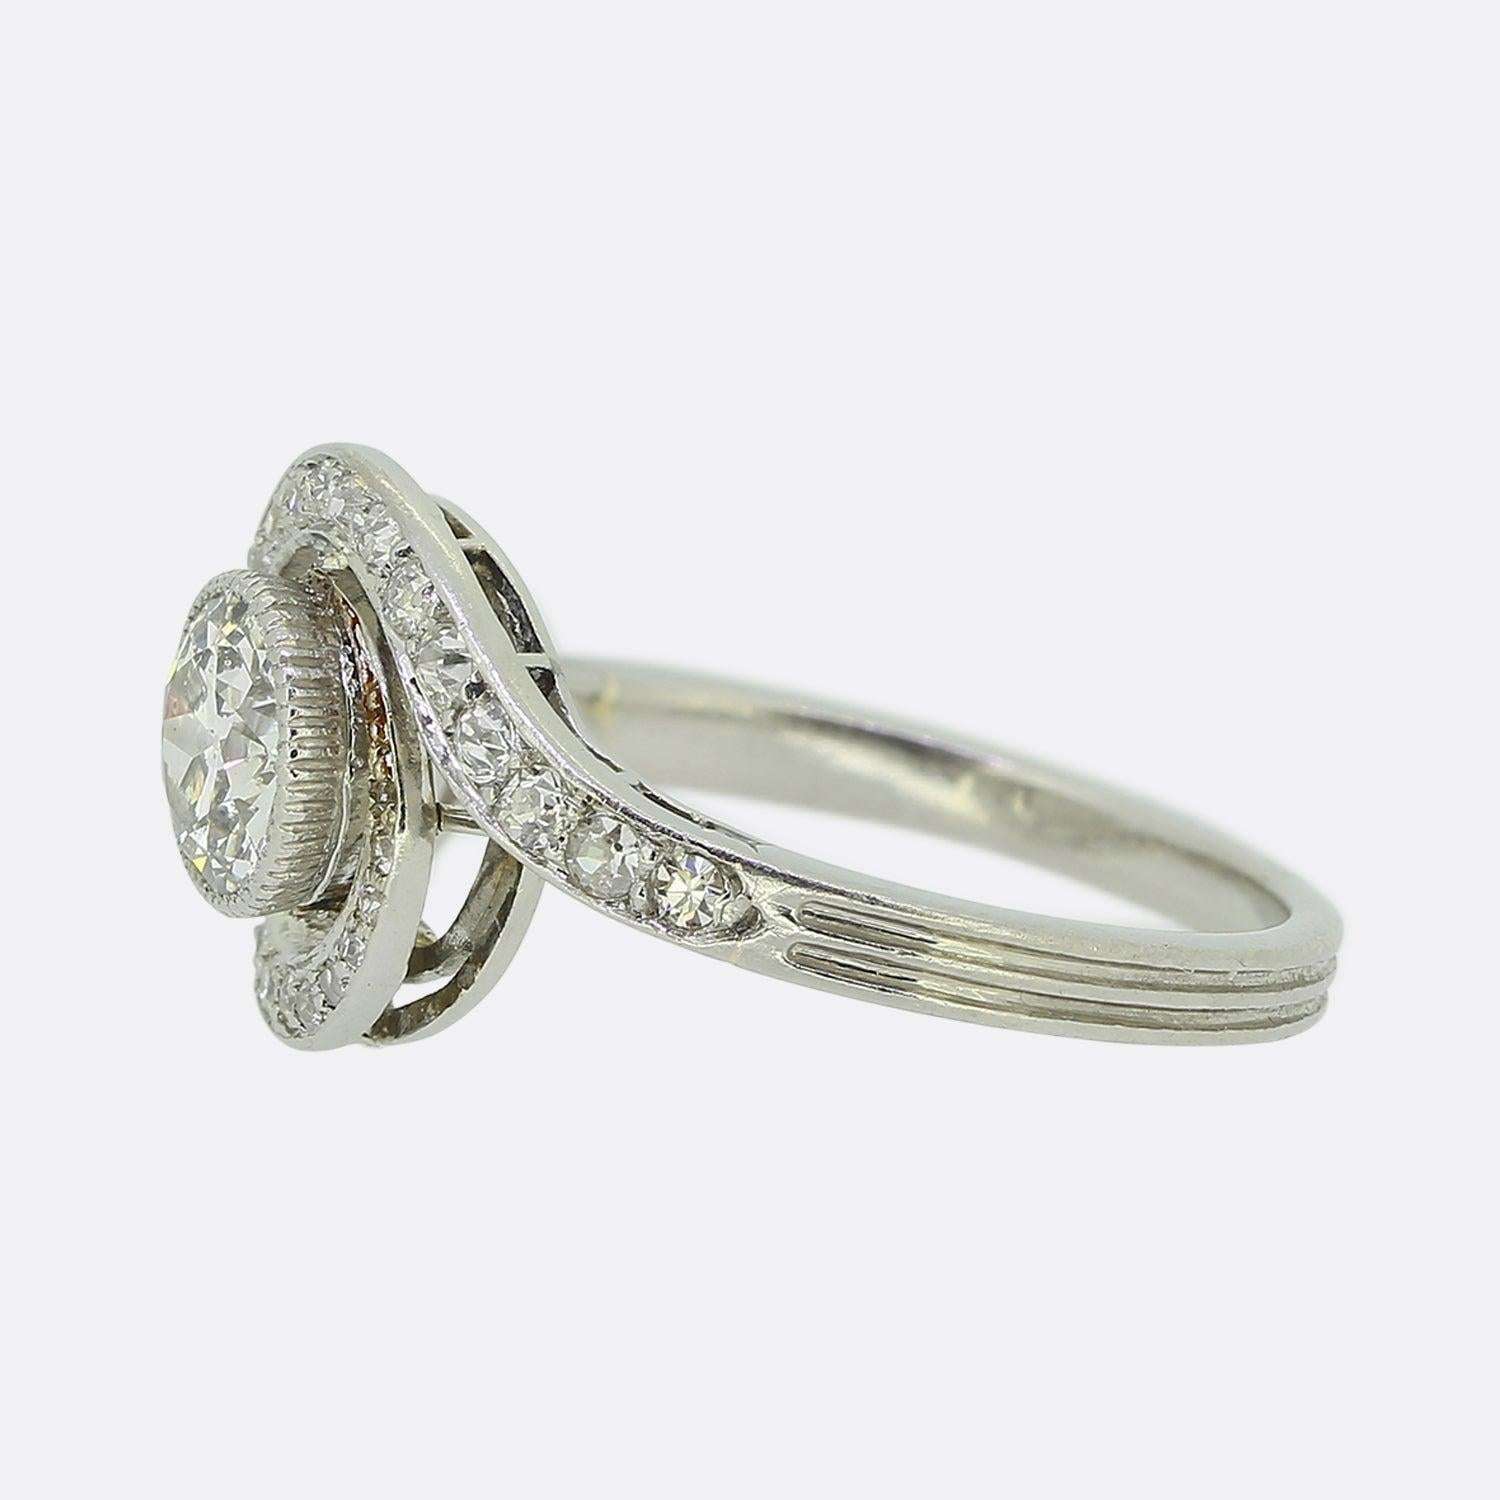 Here we have a fabulous diamond swirl ring dating back to the Edwardian period. This antique piece showcases a single round faceted old European cut diamond at the centre of the face in a fine milgrain setting. This principle stone sits slightly